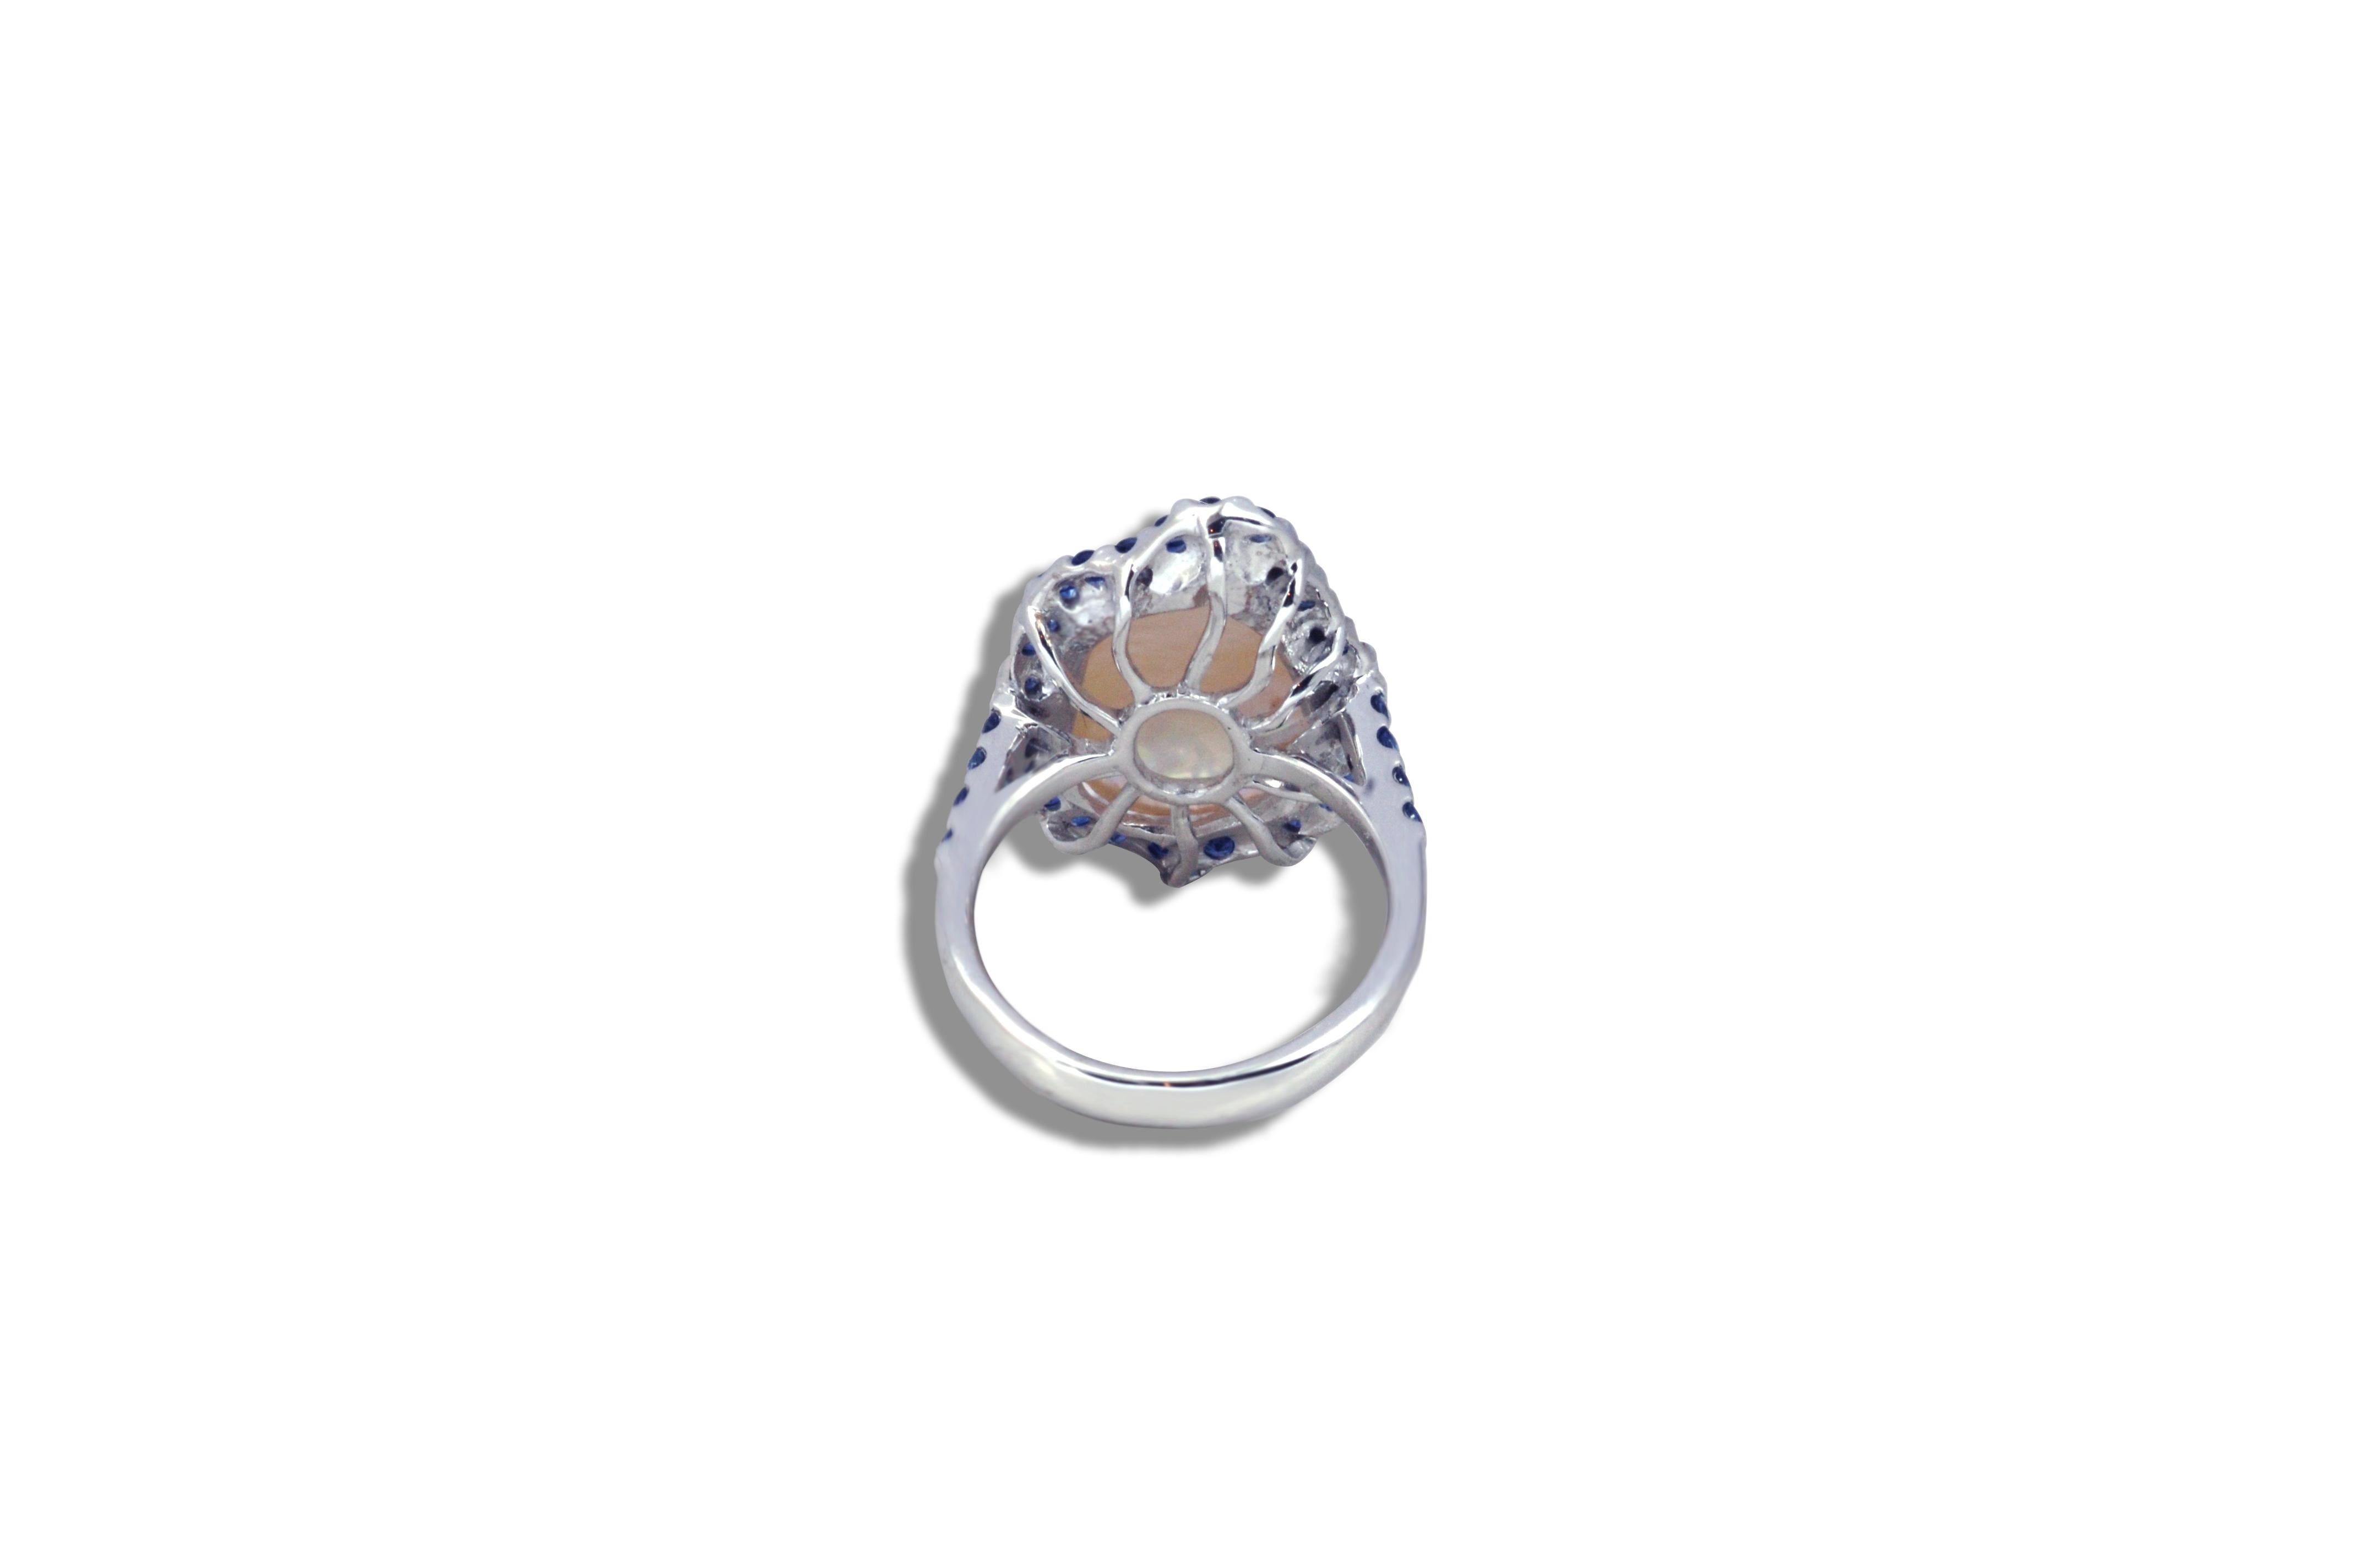 Uncut Fresh Water Pearl, Blue Sapphire 1.03 Carat Ring in 18 Karat White Gold Settings For Sale